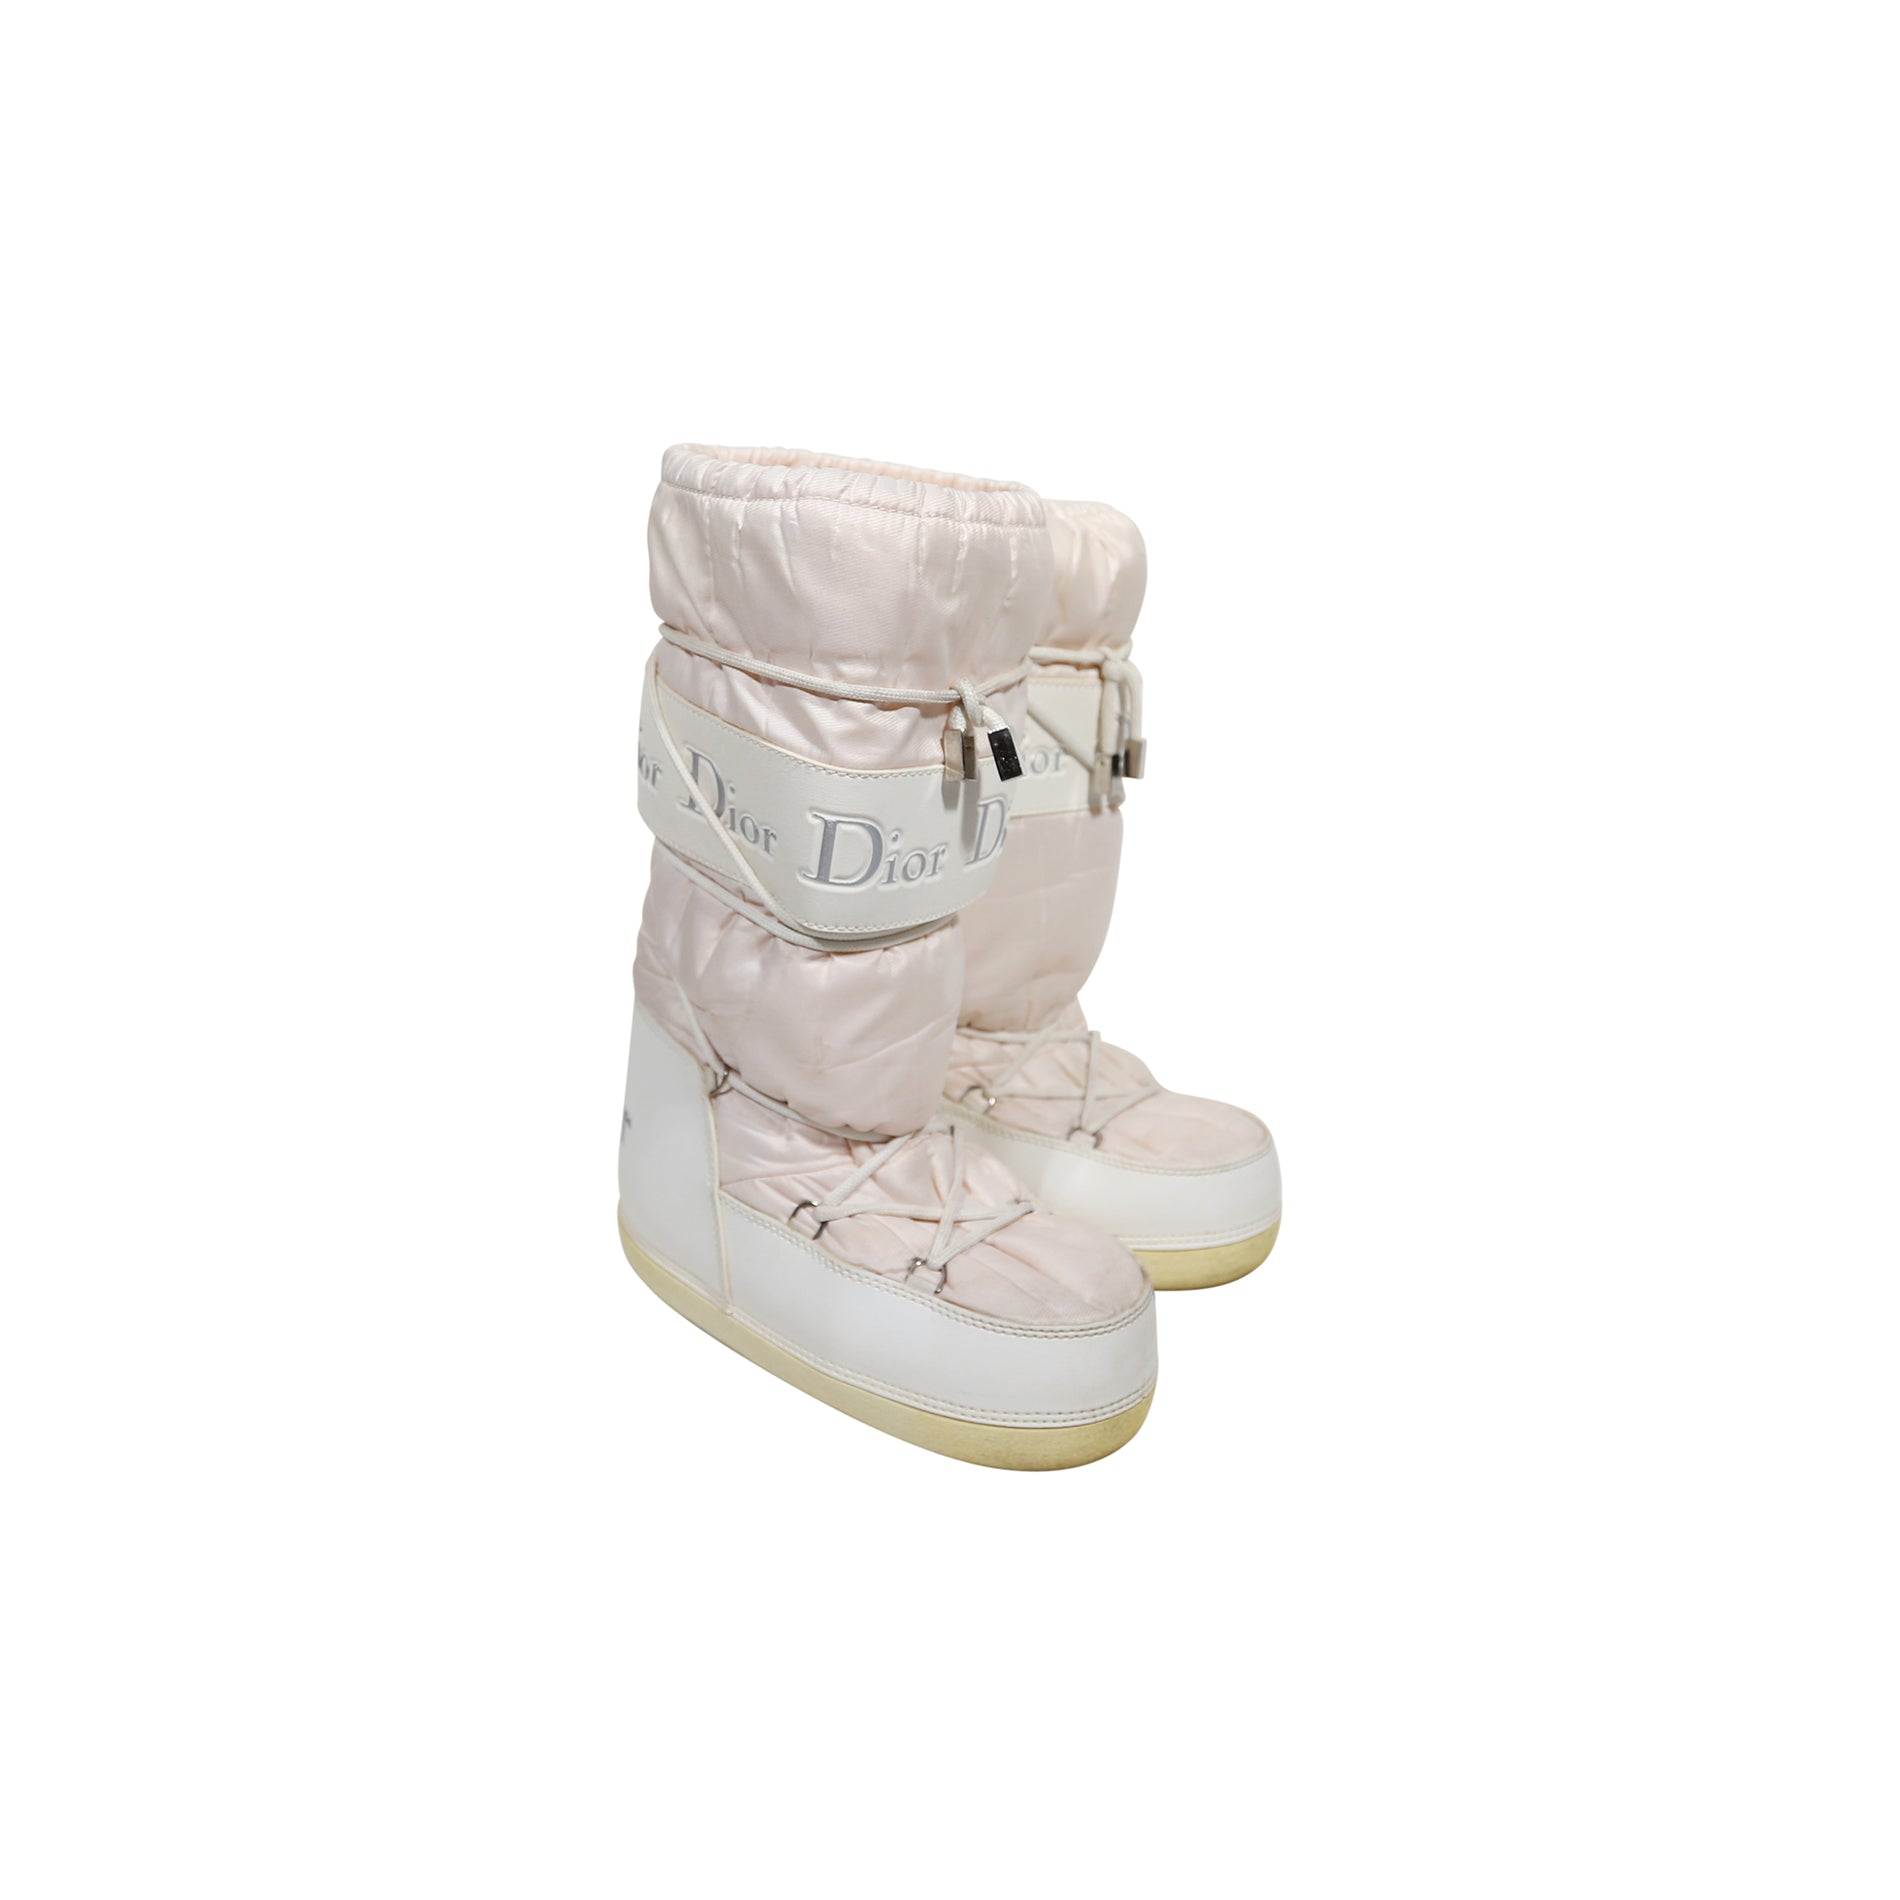 Christian Dior 2000s Pink Moon Boots by John Galliano